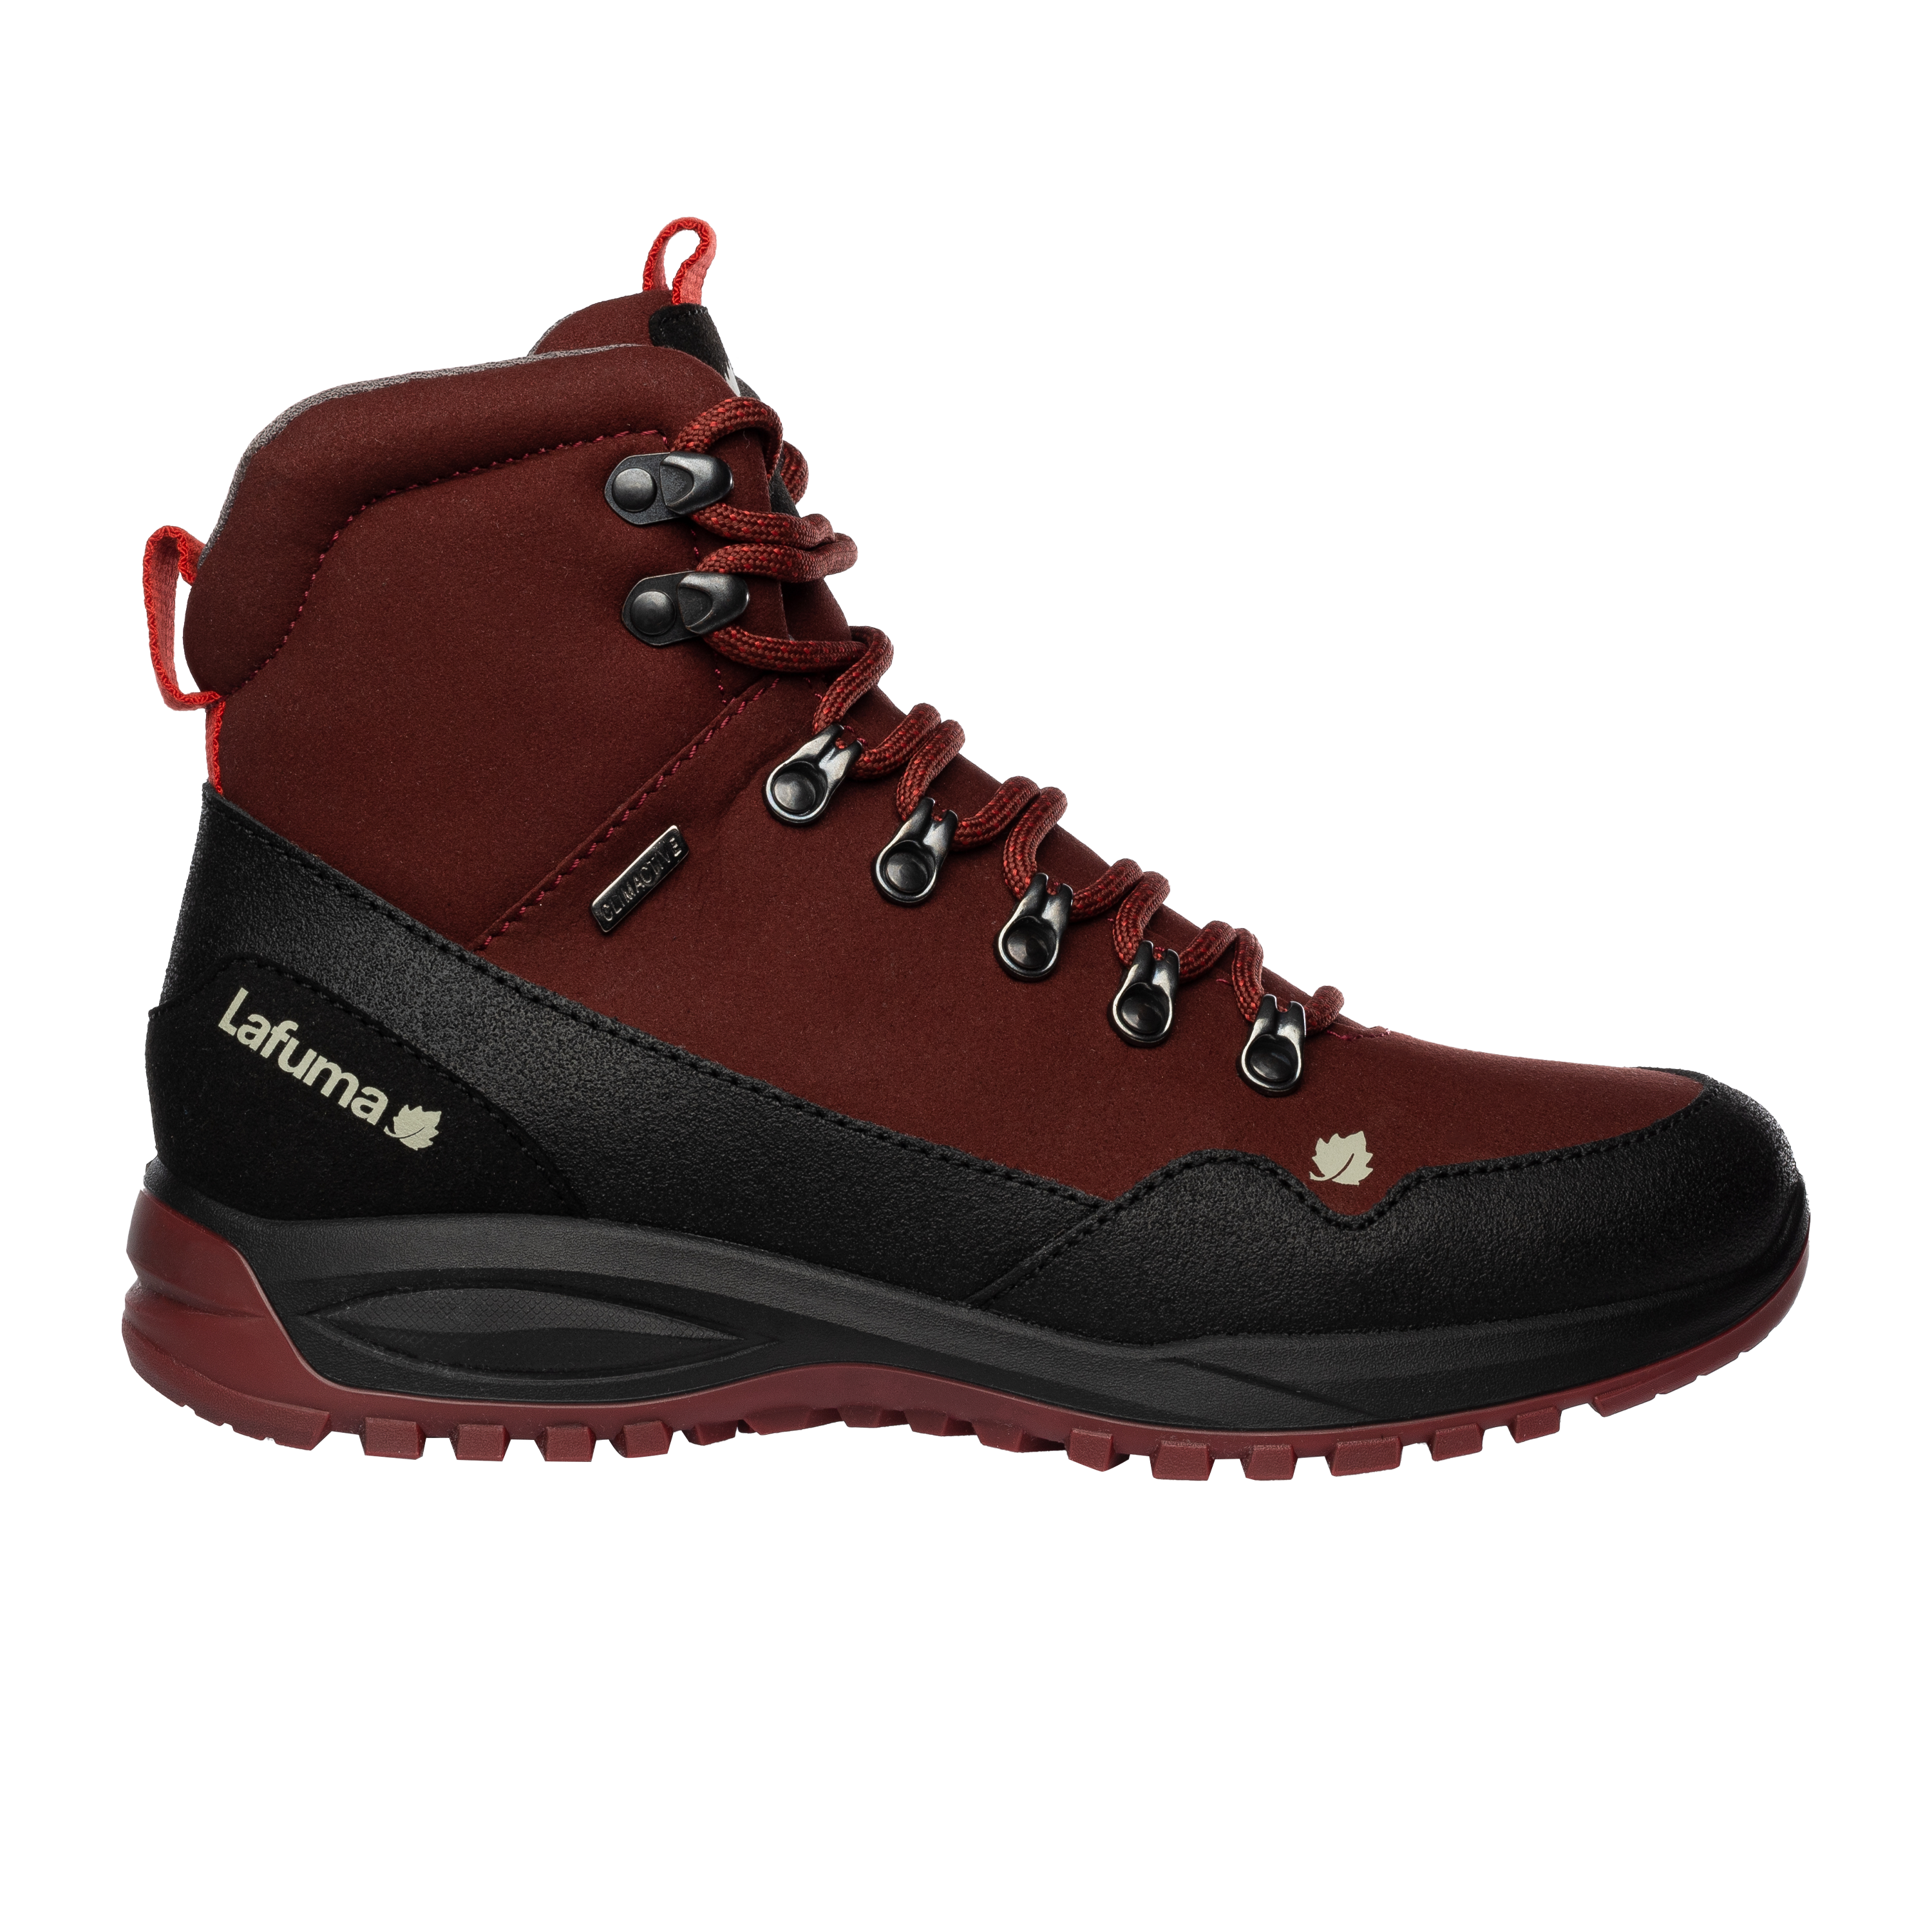 Chaussures SENTINEL CLIM SMU BOOT W femme - rouge